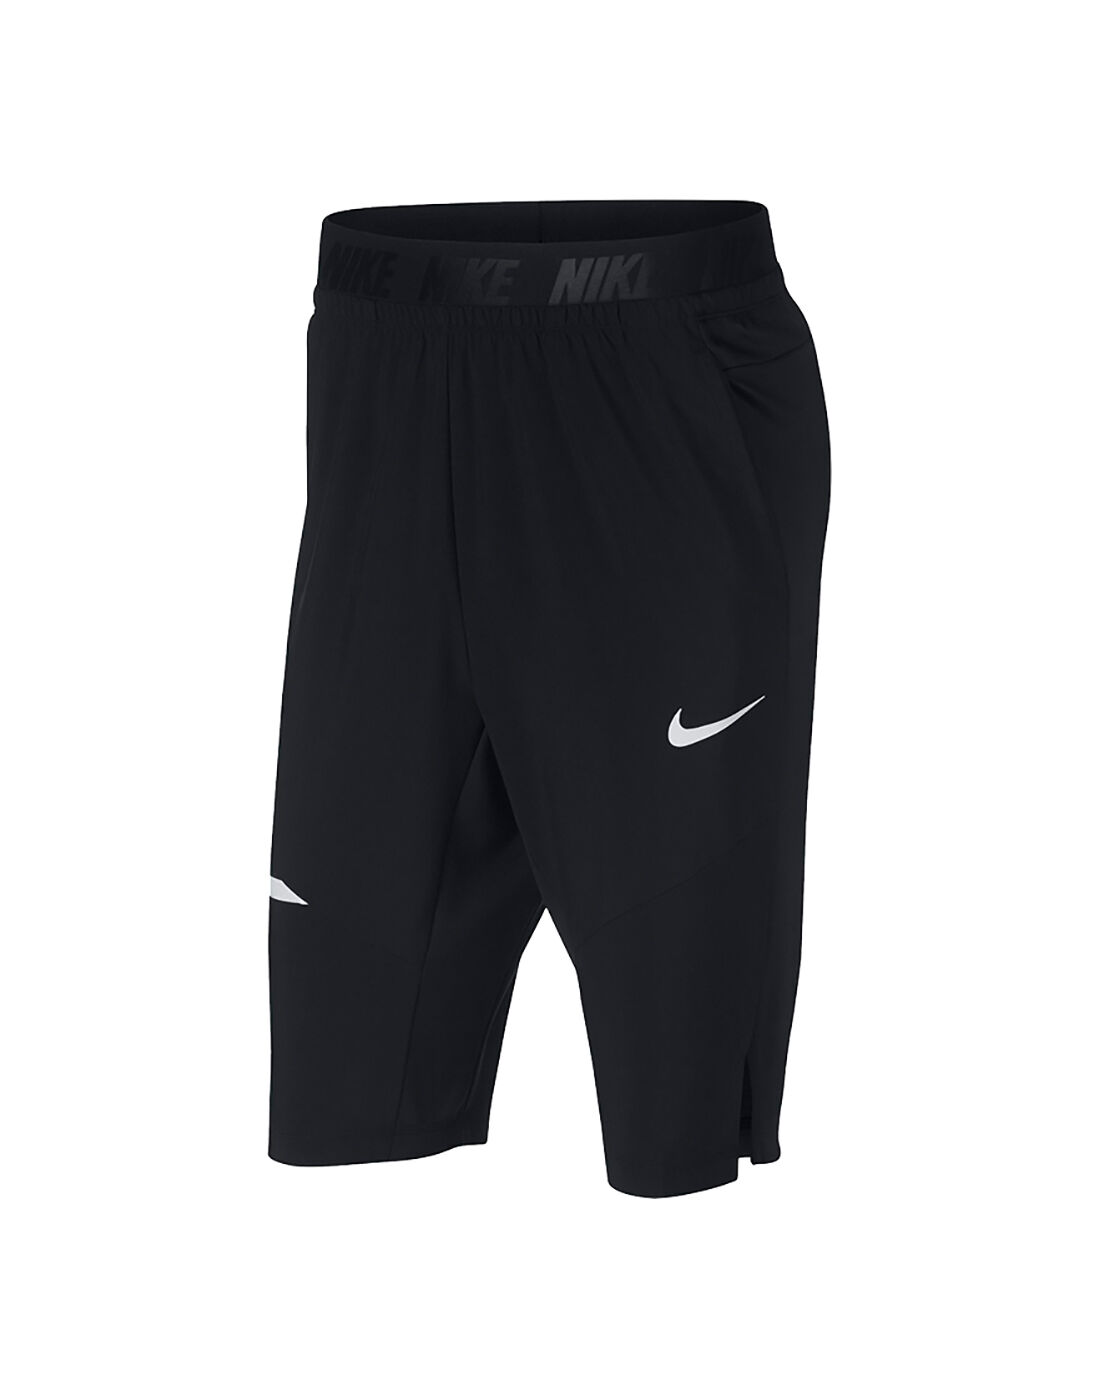 nike project x shorts